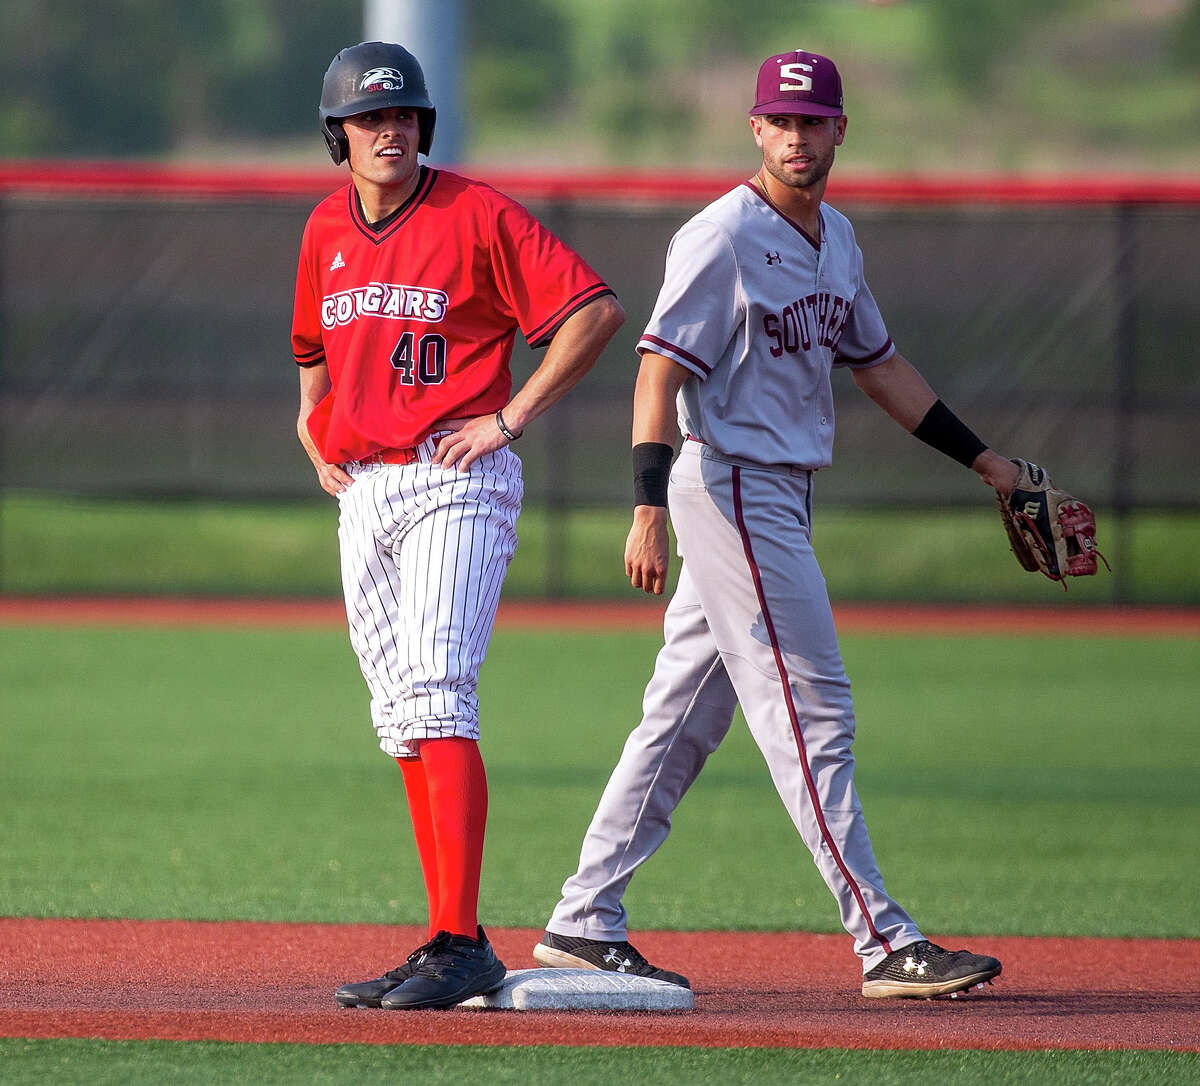 SIU Carbondale second baseman Grey Epps, right, keeps an eye on SIUE's Nic Roes during Tuesday's game in Edwardsville.